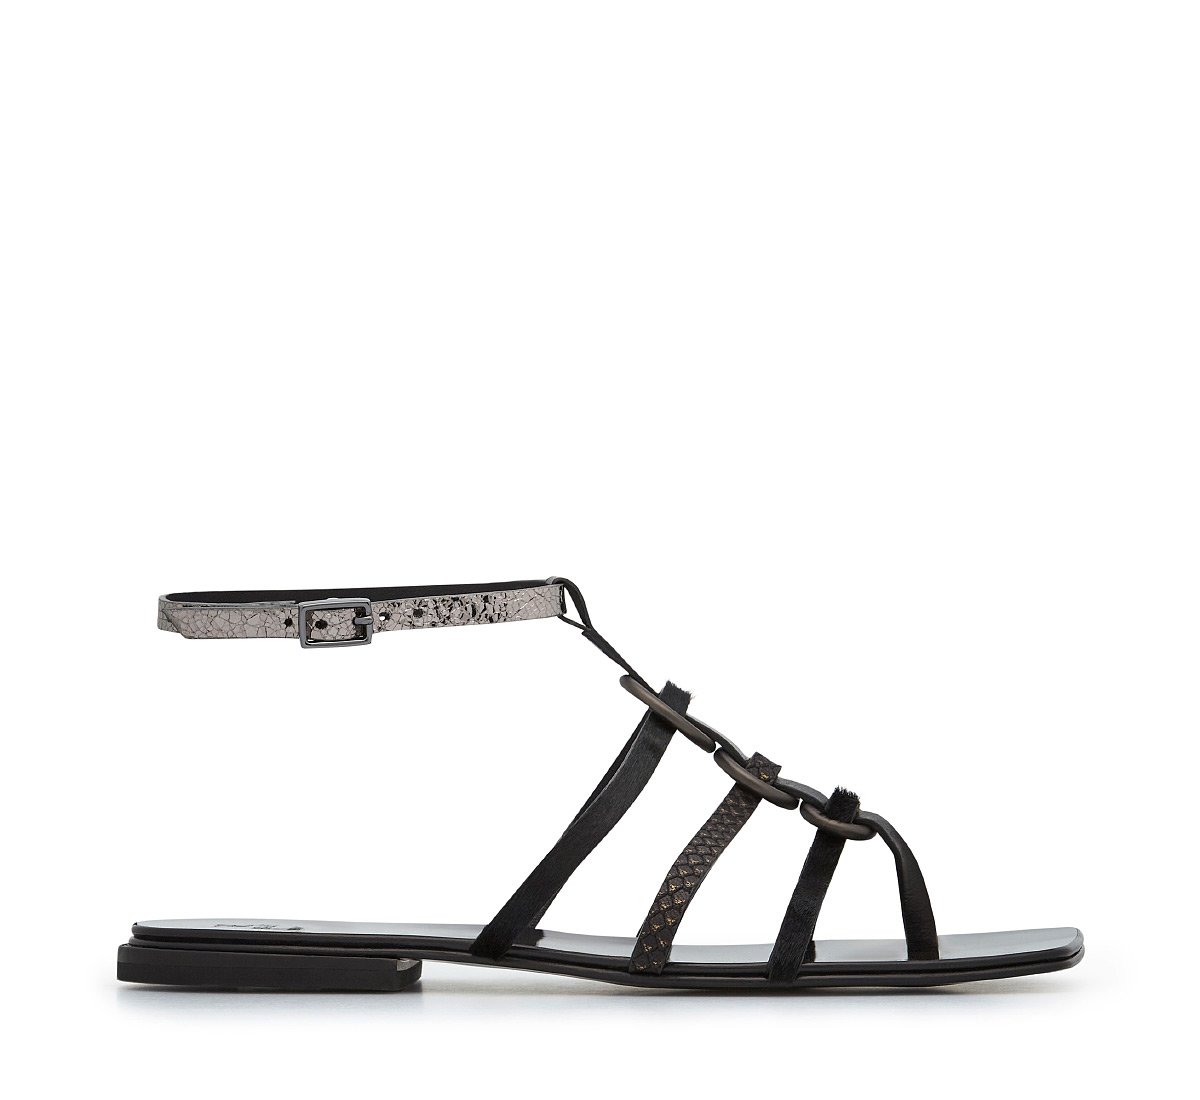 Thong sandals with leather sole